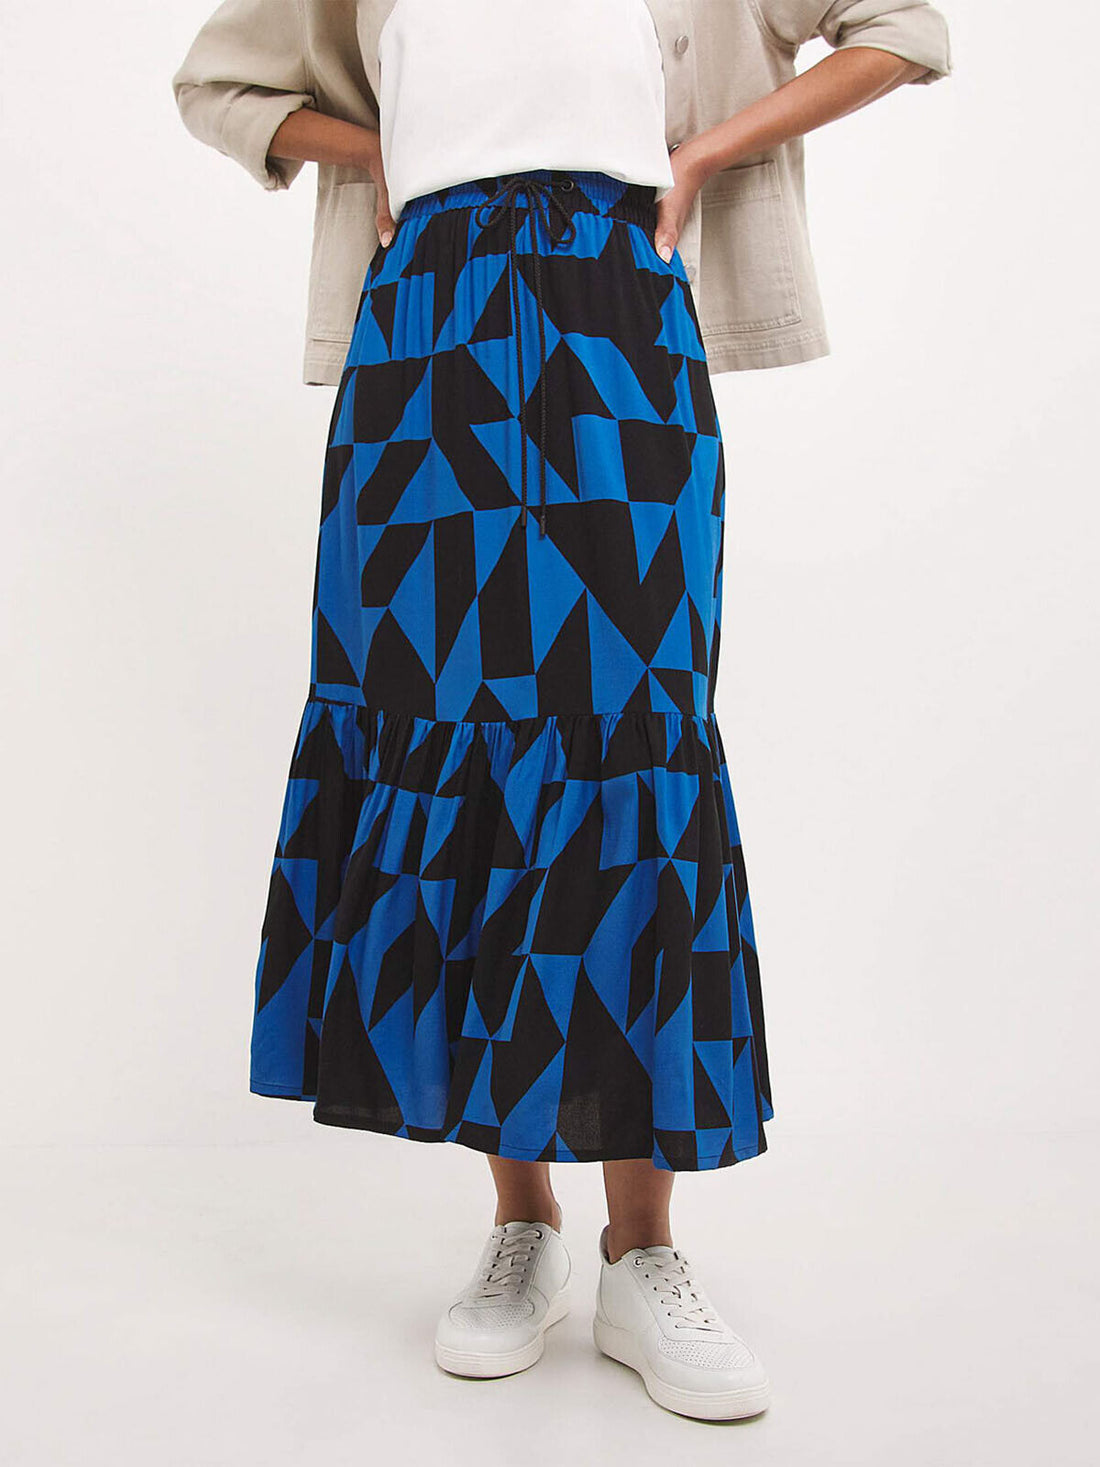 JD Williams Blue Printed Tiered Skirt Sizes 14, 18, 20, 22, 24, 26, 28, 30, 32